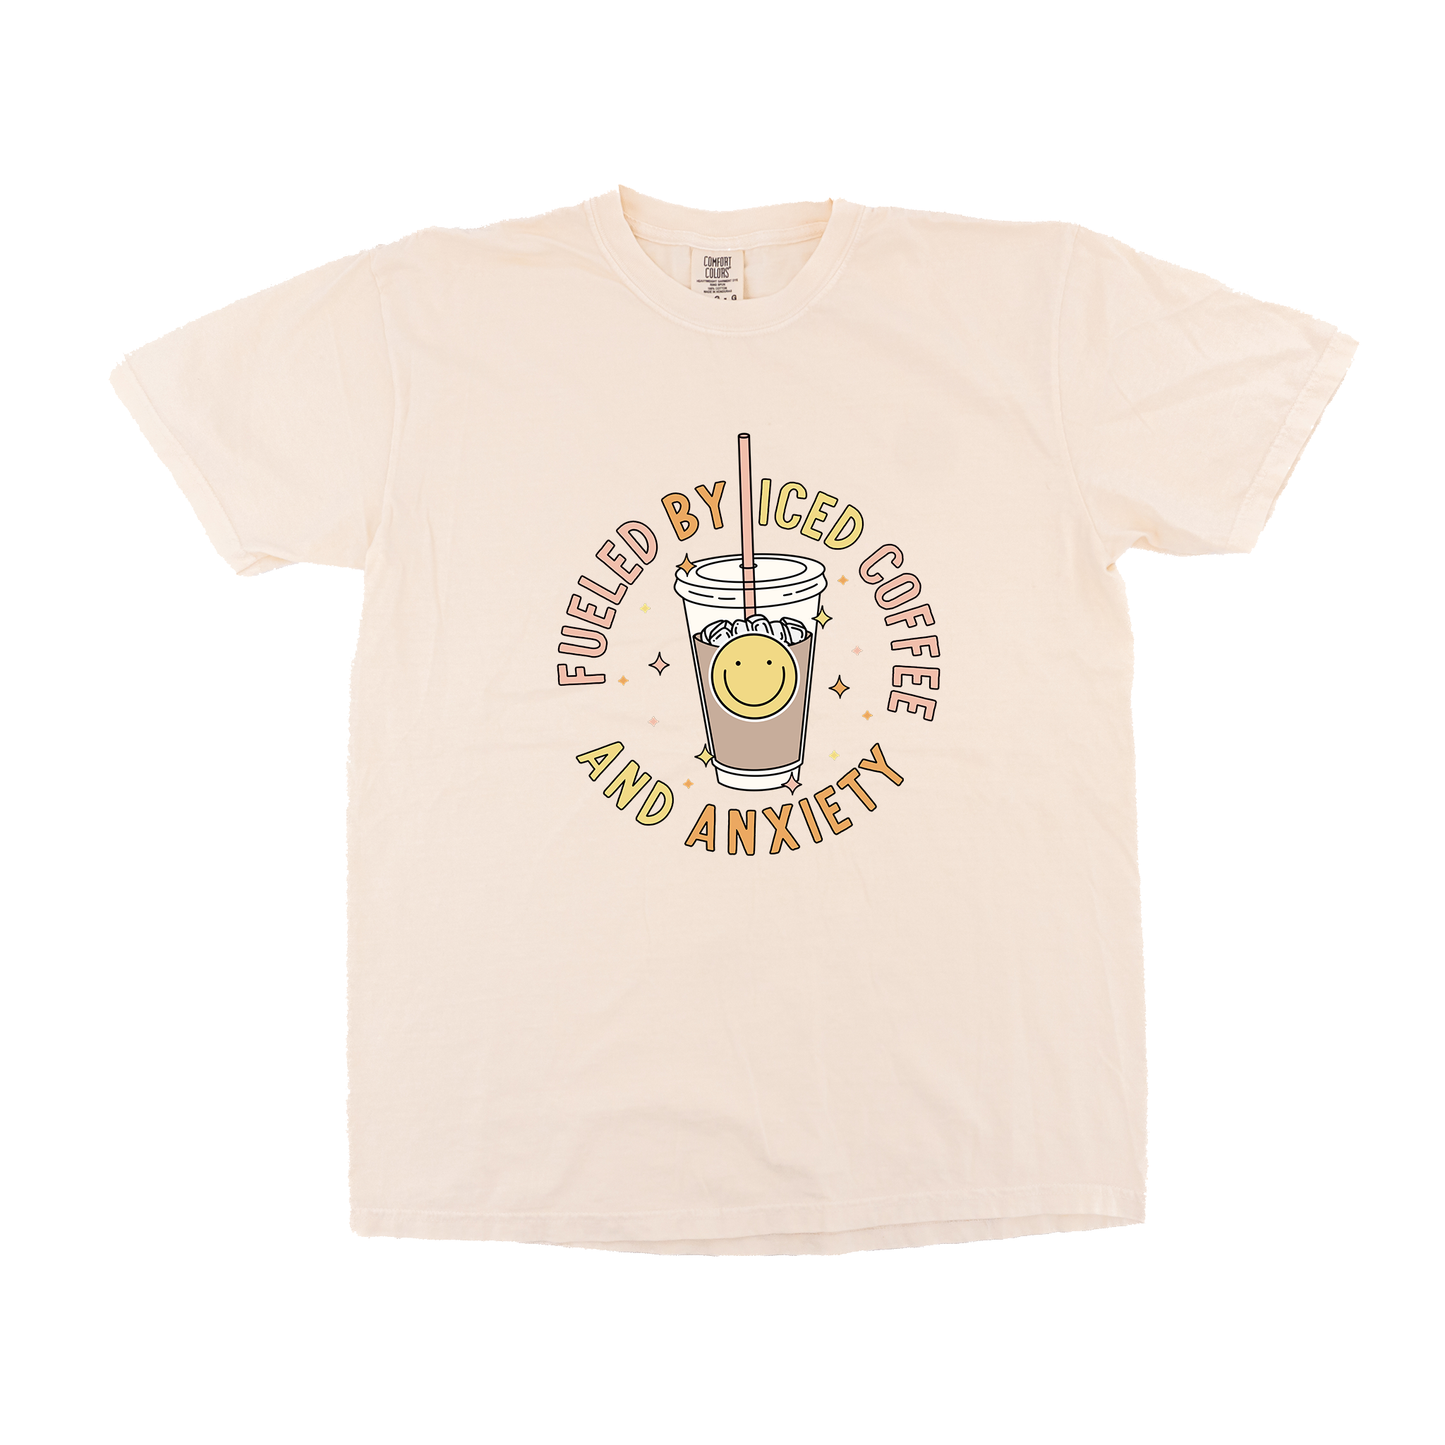 Fueled By Iced Coffee and Anxiety - Tee (Vintage Natural)